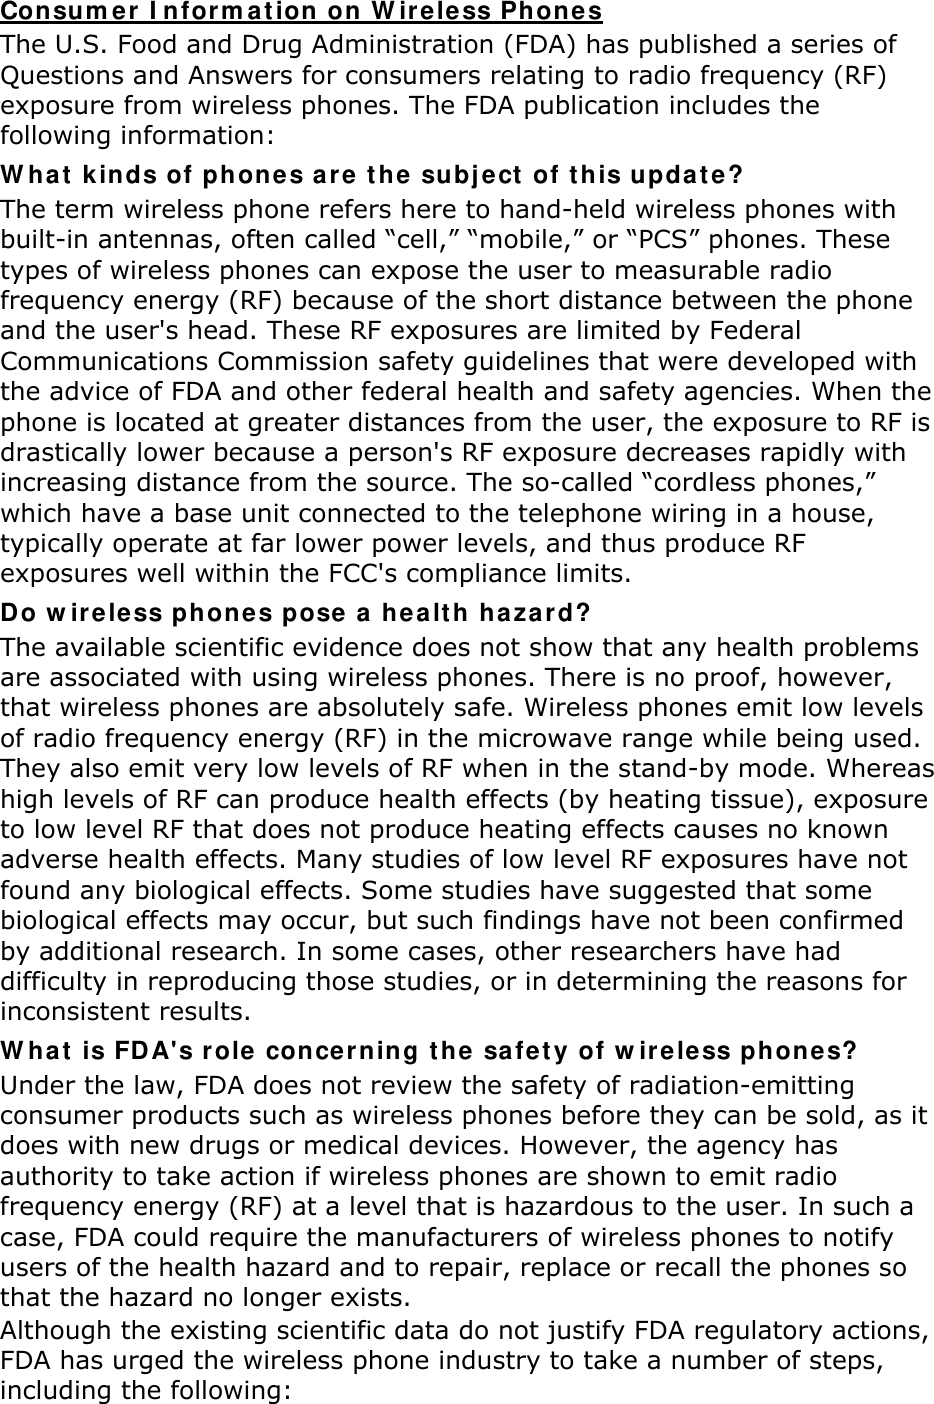 Con sum er  I nfor m at ion  on W ir e less Phones The U.S. Food and Drug Administration (FDA) has published a series of Questions and Answers for consumers relating to radio frequency (RF) exposure from wireless phones. The FDA publication includes the following information: W ha t  k inds of phone s are t he subj e ct of t his upda t e? The term wireless phone refers here to hand-held wireless phones with built-in antennas, often called “cell,” “mobile,” or “PCS” phones. These types of wireless phones can expose the user to measurable radio frequency energy (RF) because of the short distance between the phone and the user&apos;s head. These RF exposures are limited by Federal Communications Commission safety guidelines that were developed with the advice of FDA and other federal health and safety agencies. When the phone is located at greater distances from the user, the exposure to RF is drastically lower because a person&apos;s RF exposure decreases rapidly with increasing distance from the source. The so-called “cordless phones,” which have a base unit connected to the telephone wiring in a house, typically operate at far lower power levels, and thus produce RF exposures well within the FCC&apos;s compliance limits. Do w ir e less phone s pose  a healt h haza r d? The available scientific evidence does not show that any health problems are associated with using wireless phones. There is no proof, however, that wireless phones are absolutely safe. Wireless phones emit low levels of radio frequency energy (RF) in the microwave range while being used. They also emit very low levels of RF when in the stand-by mode. Whereas high levels of RF can produce health effects (by heating tissue), exposure to low level RF that does not produce heating effects causes no known adverse health effects. Many studies of low level RF exposures have not found any biological effects. Some studies have suggested that some biological effects may occur, but such findings have not been confirmed by additional research. In some cases, other researchers have had difficulty in reproducing those studies, or in determining the reasons for inconsistent results. W ha t  is FDA&apos;s r ole conce r ning t he  safet y of w ireless phone s? Under the law, FDA does not review the safety of radiation-emitting consumer products such as wireless phones before they can be sold, as it does with new drugs or medical devices. However, the agency has authority to take action if wireless phones are shown to emit radio frequency energy (RF) at a level that is hazardous to the user. In such a case, FDA could require the manufacturers of wireless phones to notify users of the health hazard and to repair, replace or recall the phones so that the hazard no longer exists. Although the existing scientific data do not justify FDA regulatory actions, FDA has urged the wireless phone industry to take a number of steps, including the following: 